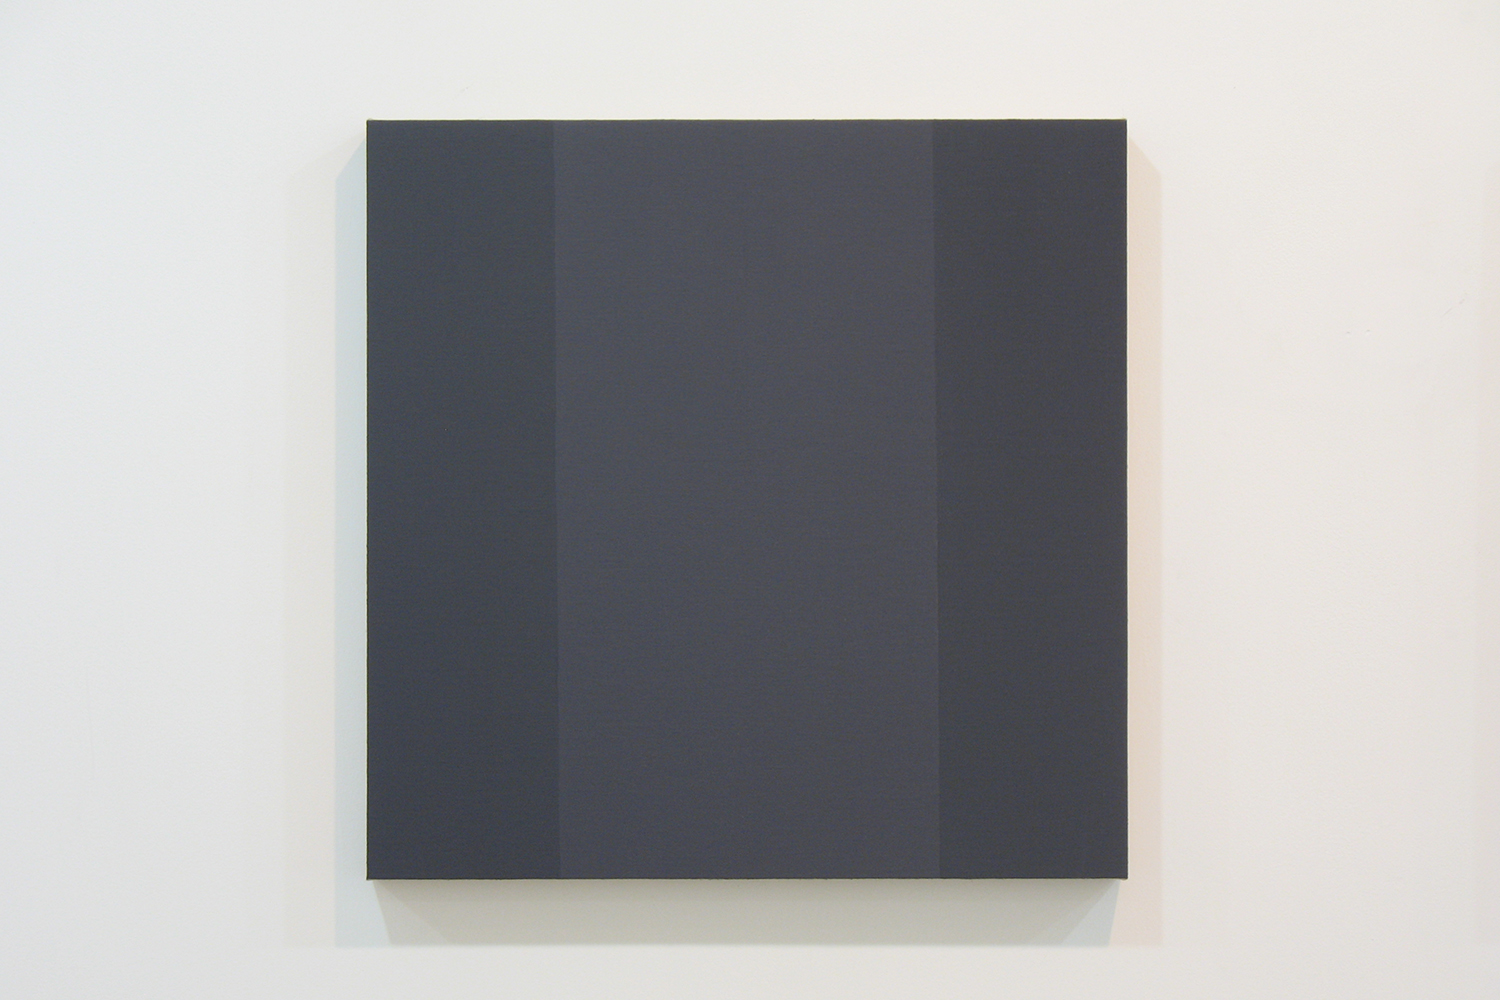 TS0901｜Gesso on linen on panel｜45 x 45 cm｜2009